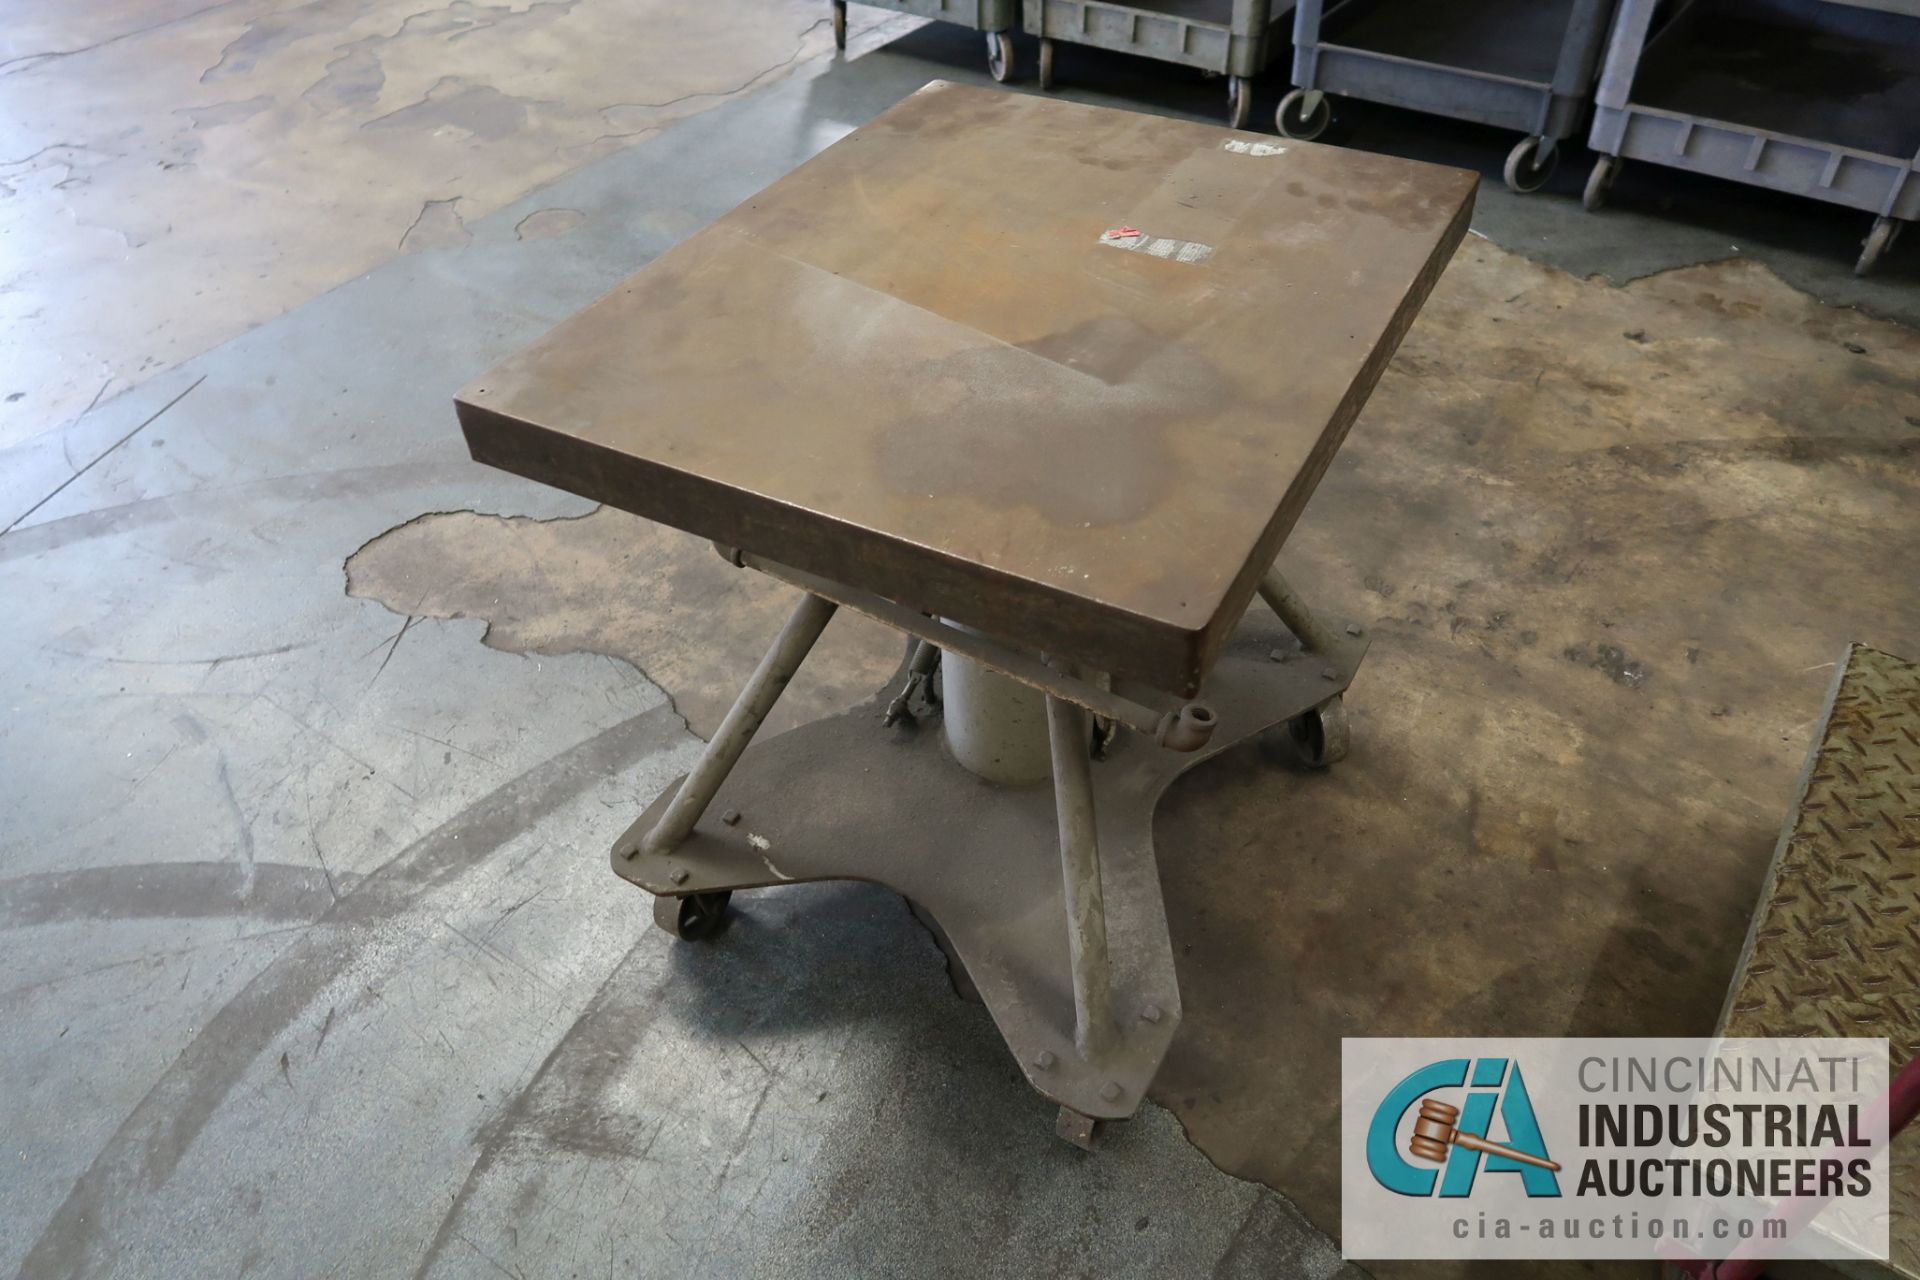 CAPACITY UNKNOWN 24" X 30" MANUAL HYDRAULIC LIFT TABLE - Image 2 of 2